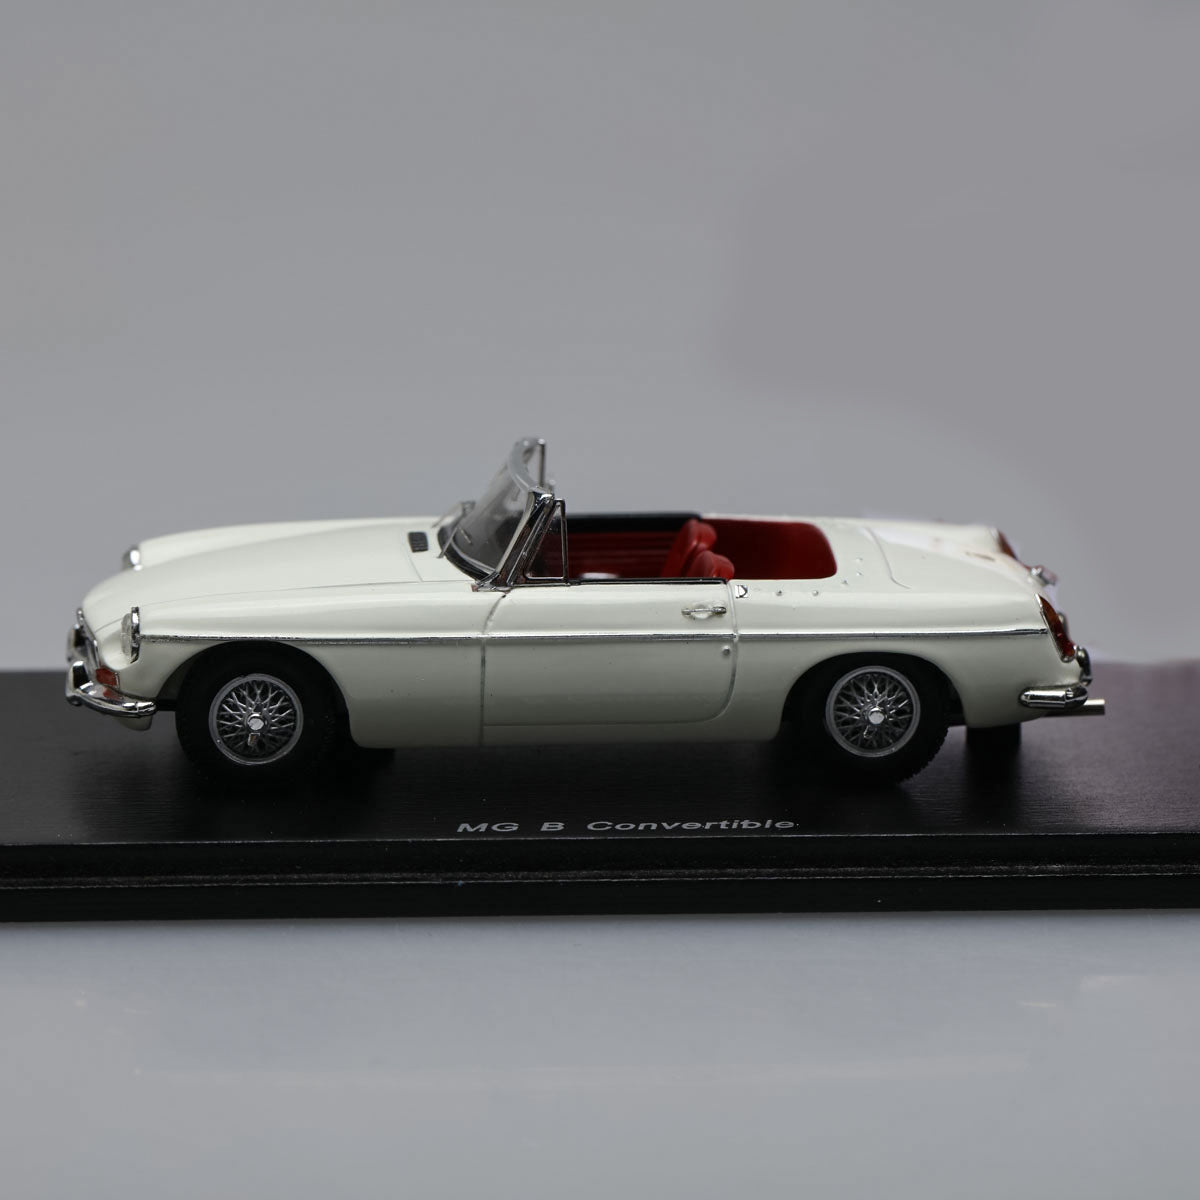 Spark 1:43 MG MGB Convertible 1966 White S4139